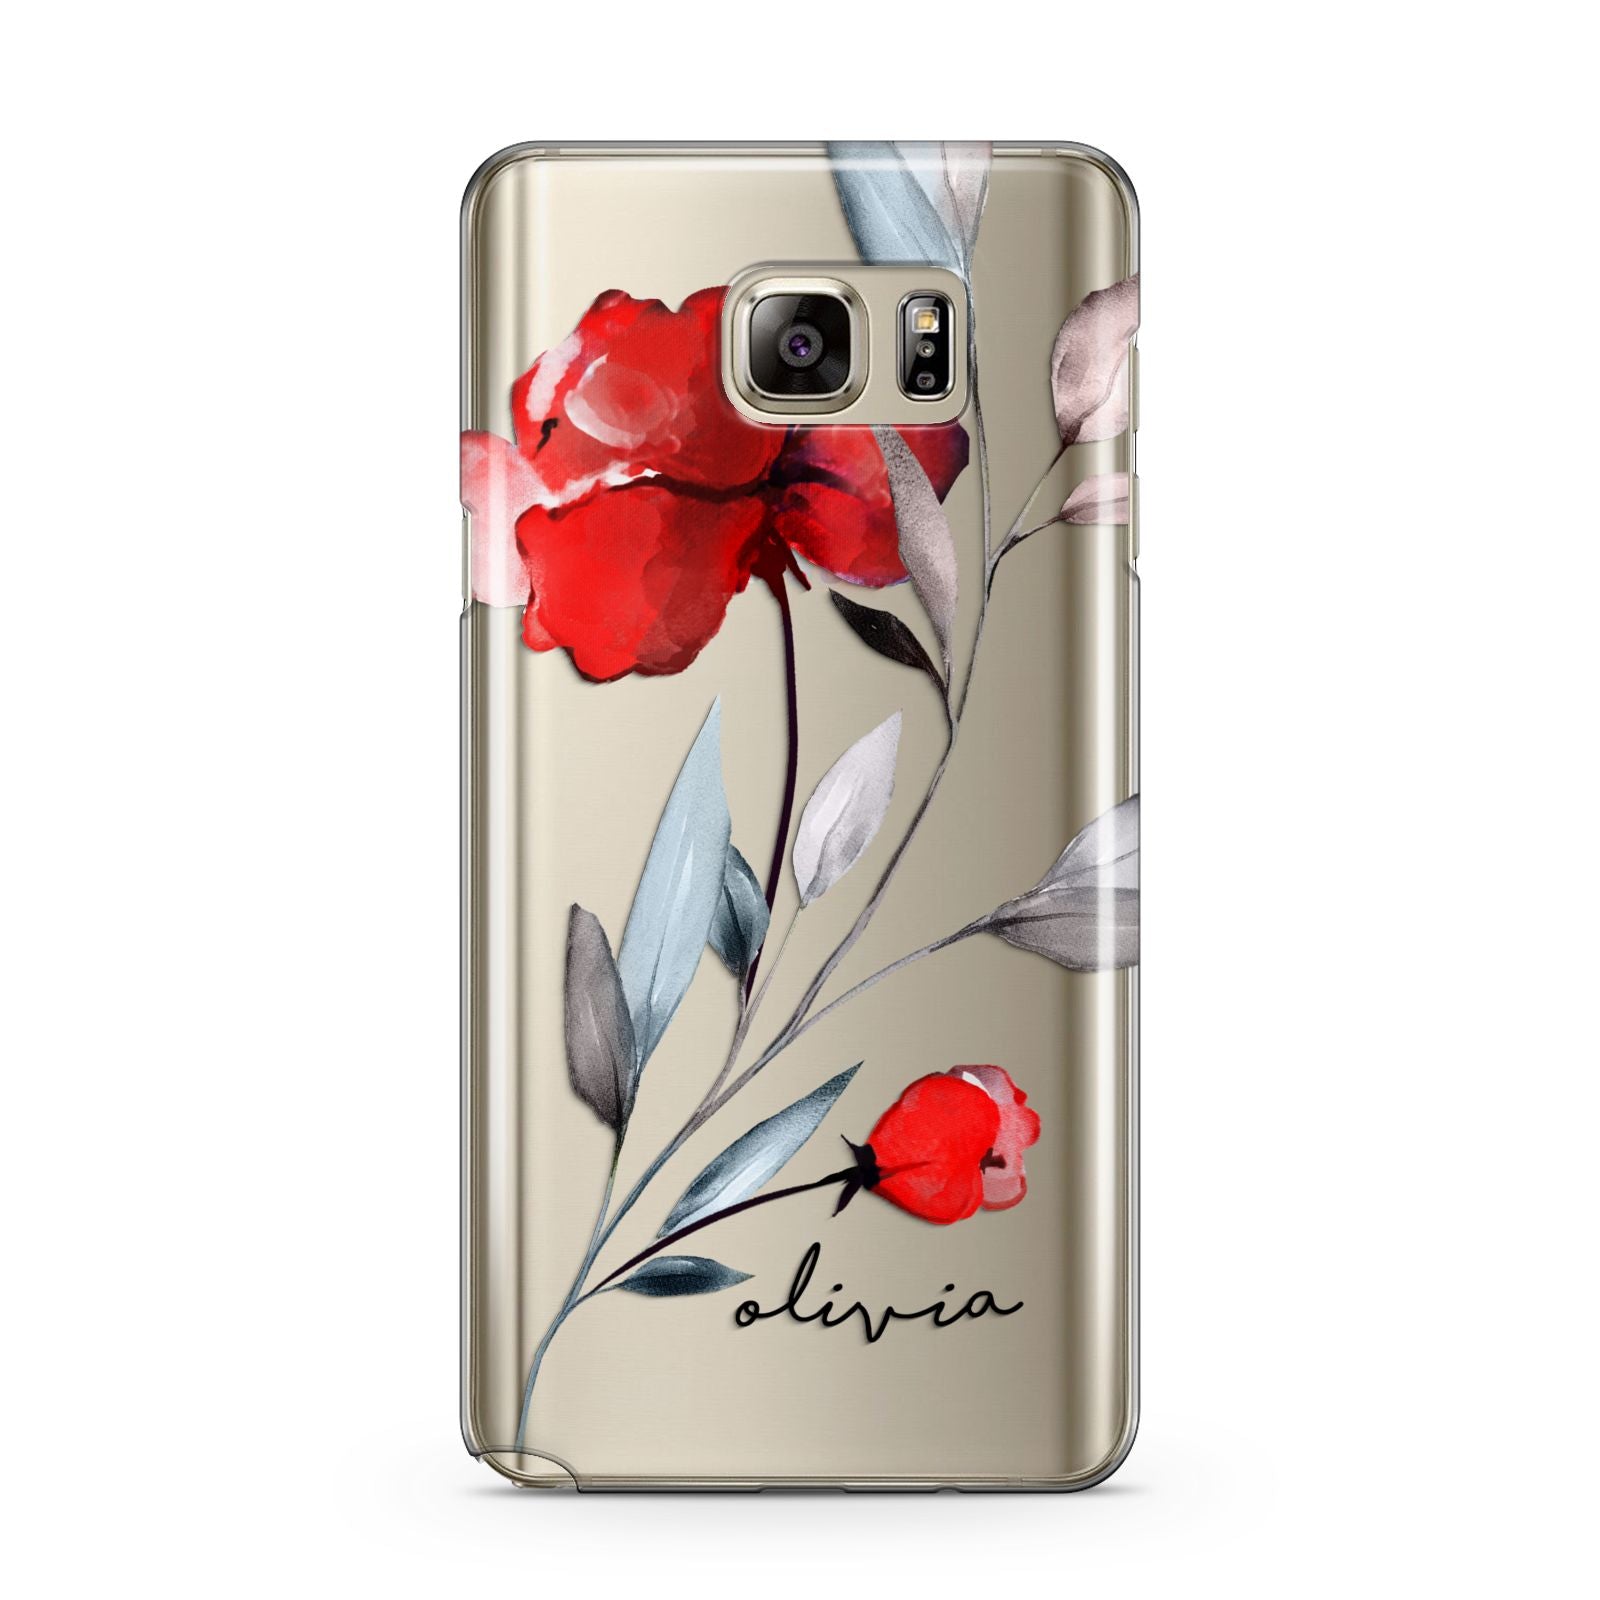 Personalised Red Roses Floral Name Samsung Galaxy Note 5 Case